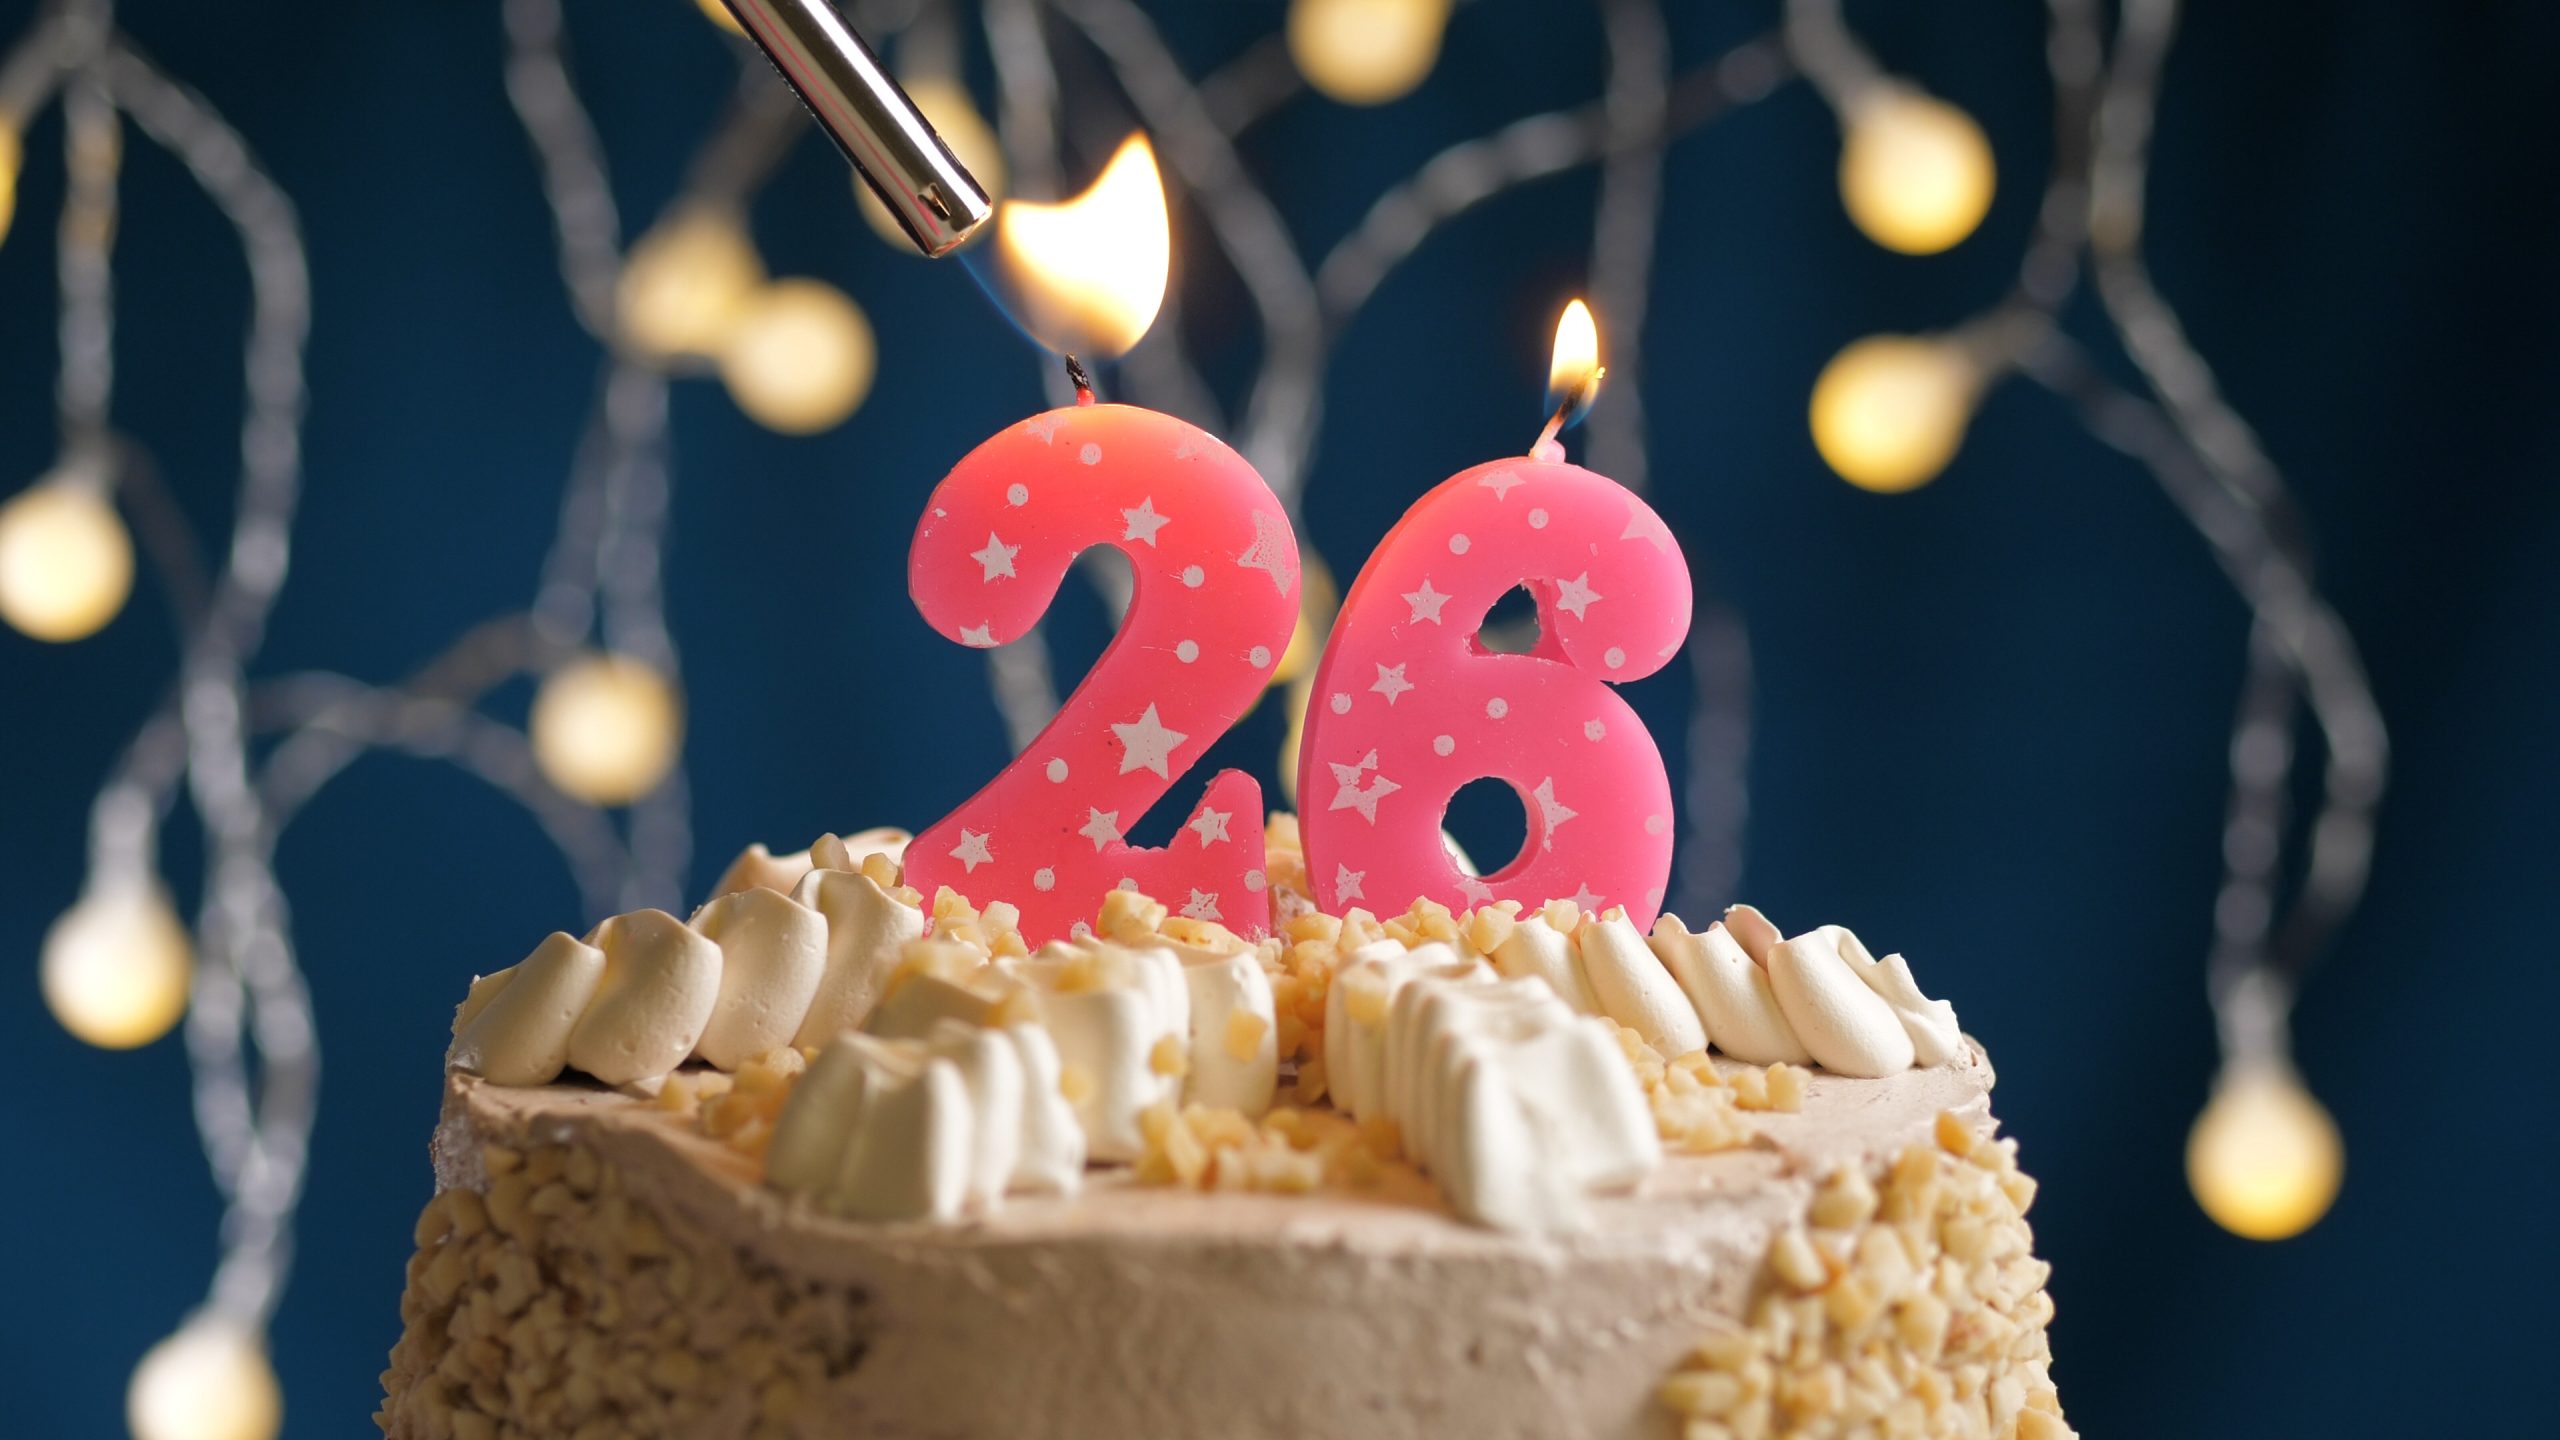 Just Turned 26? Get Health Insurance with Your Health Idaho!